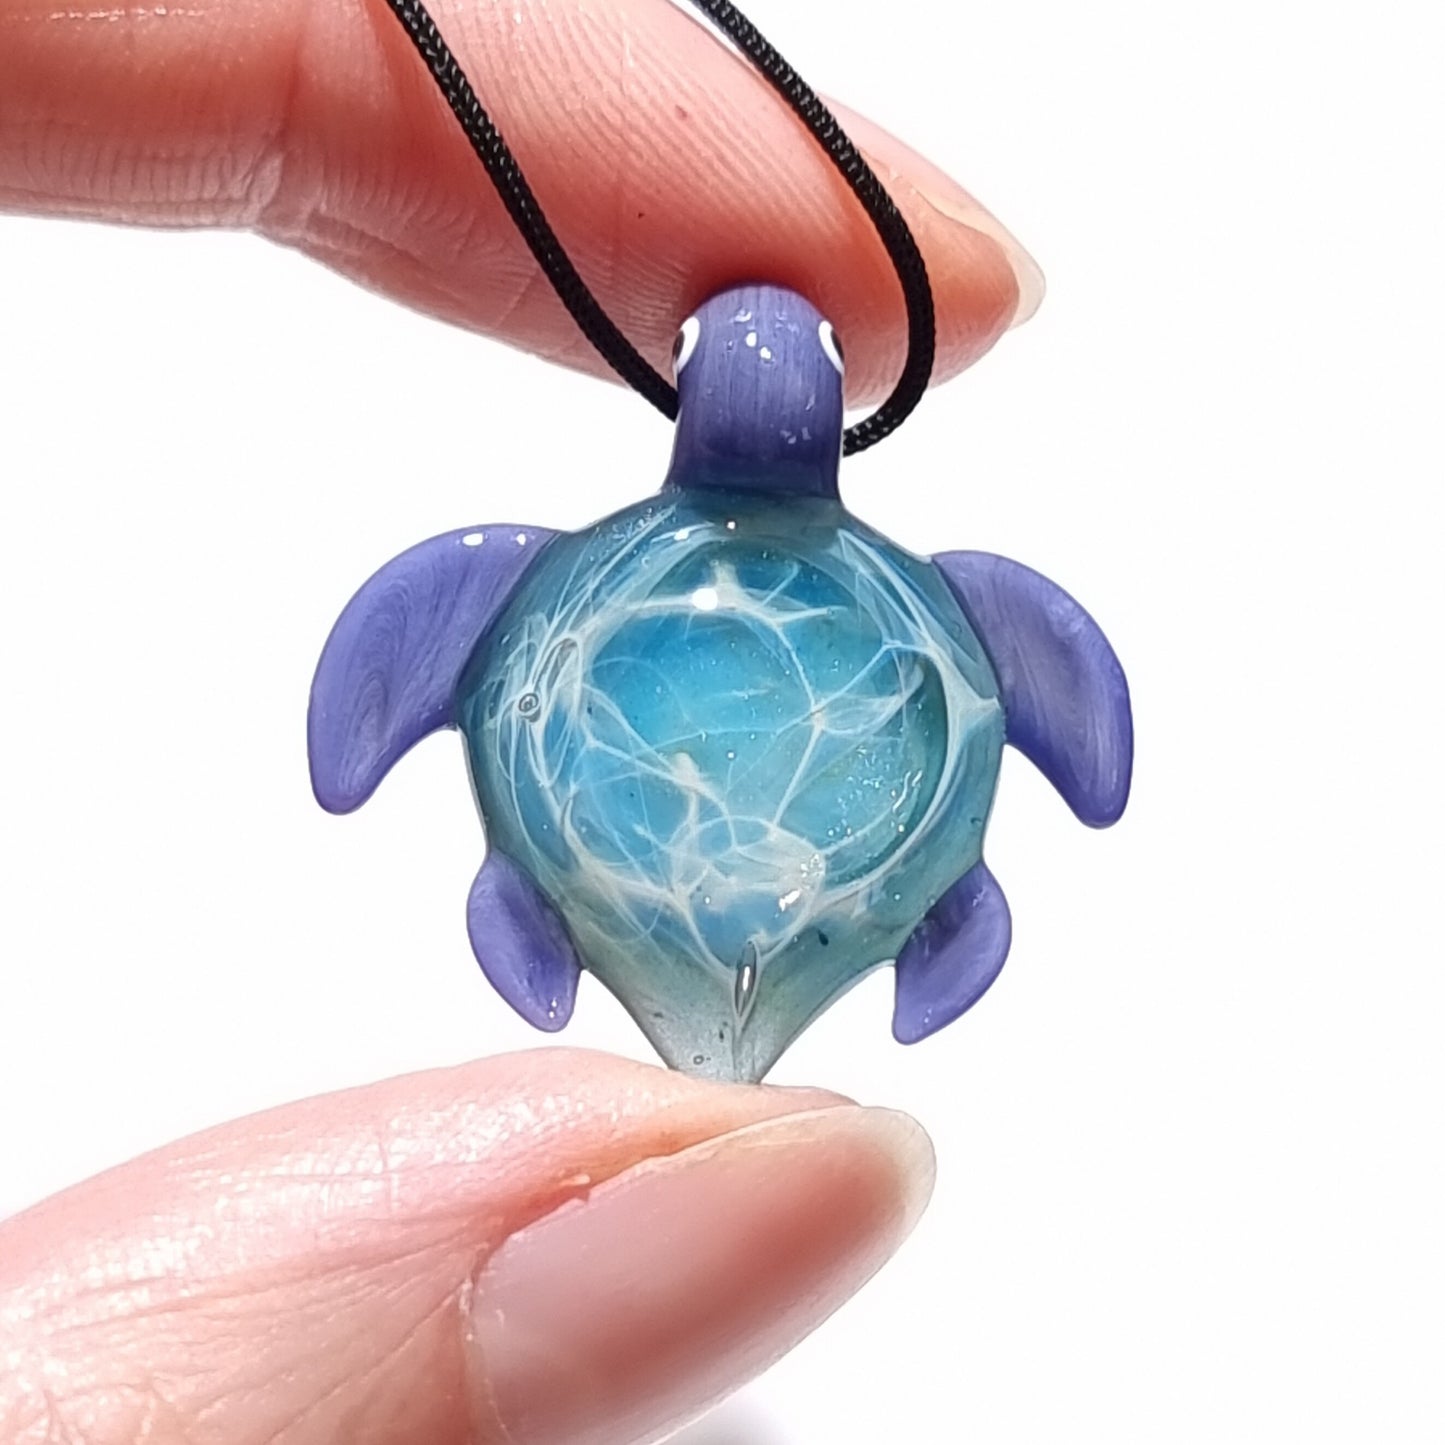 Glass Turtle - Baby Starburst Turtle Pendant - Glass Pendant - Glass Jewelry - Blown Glass - Artist Signed - Details of Silver